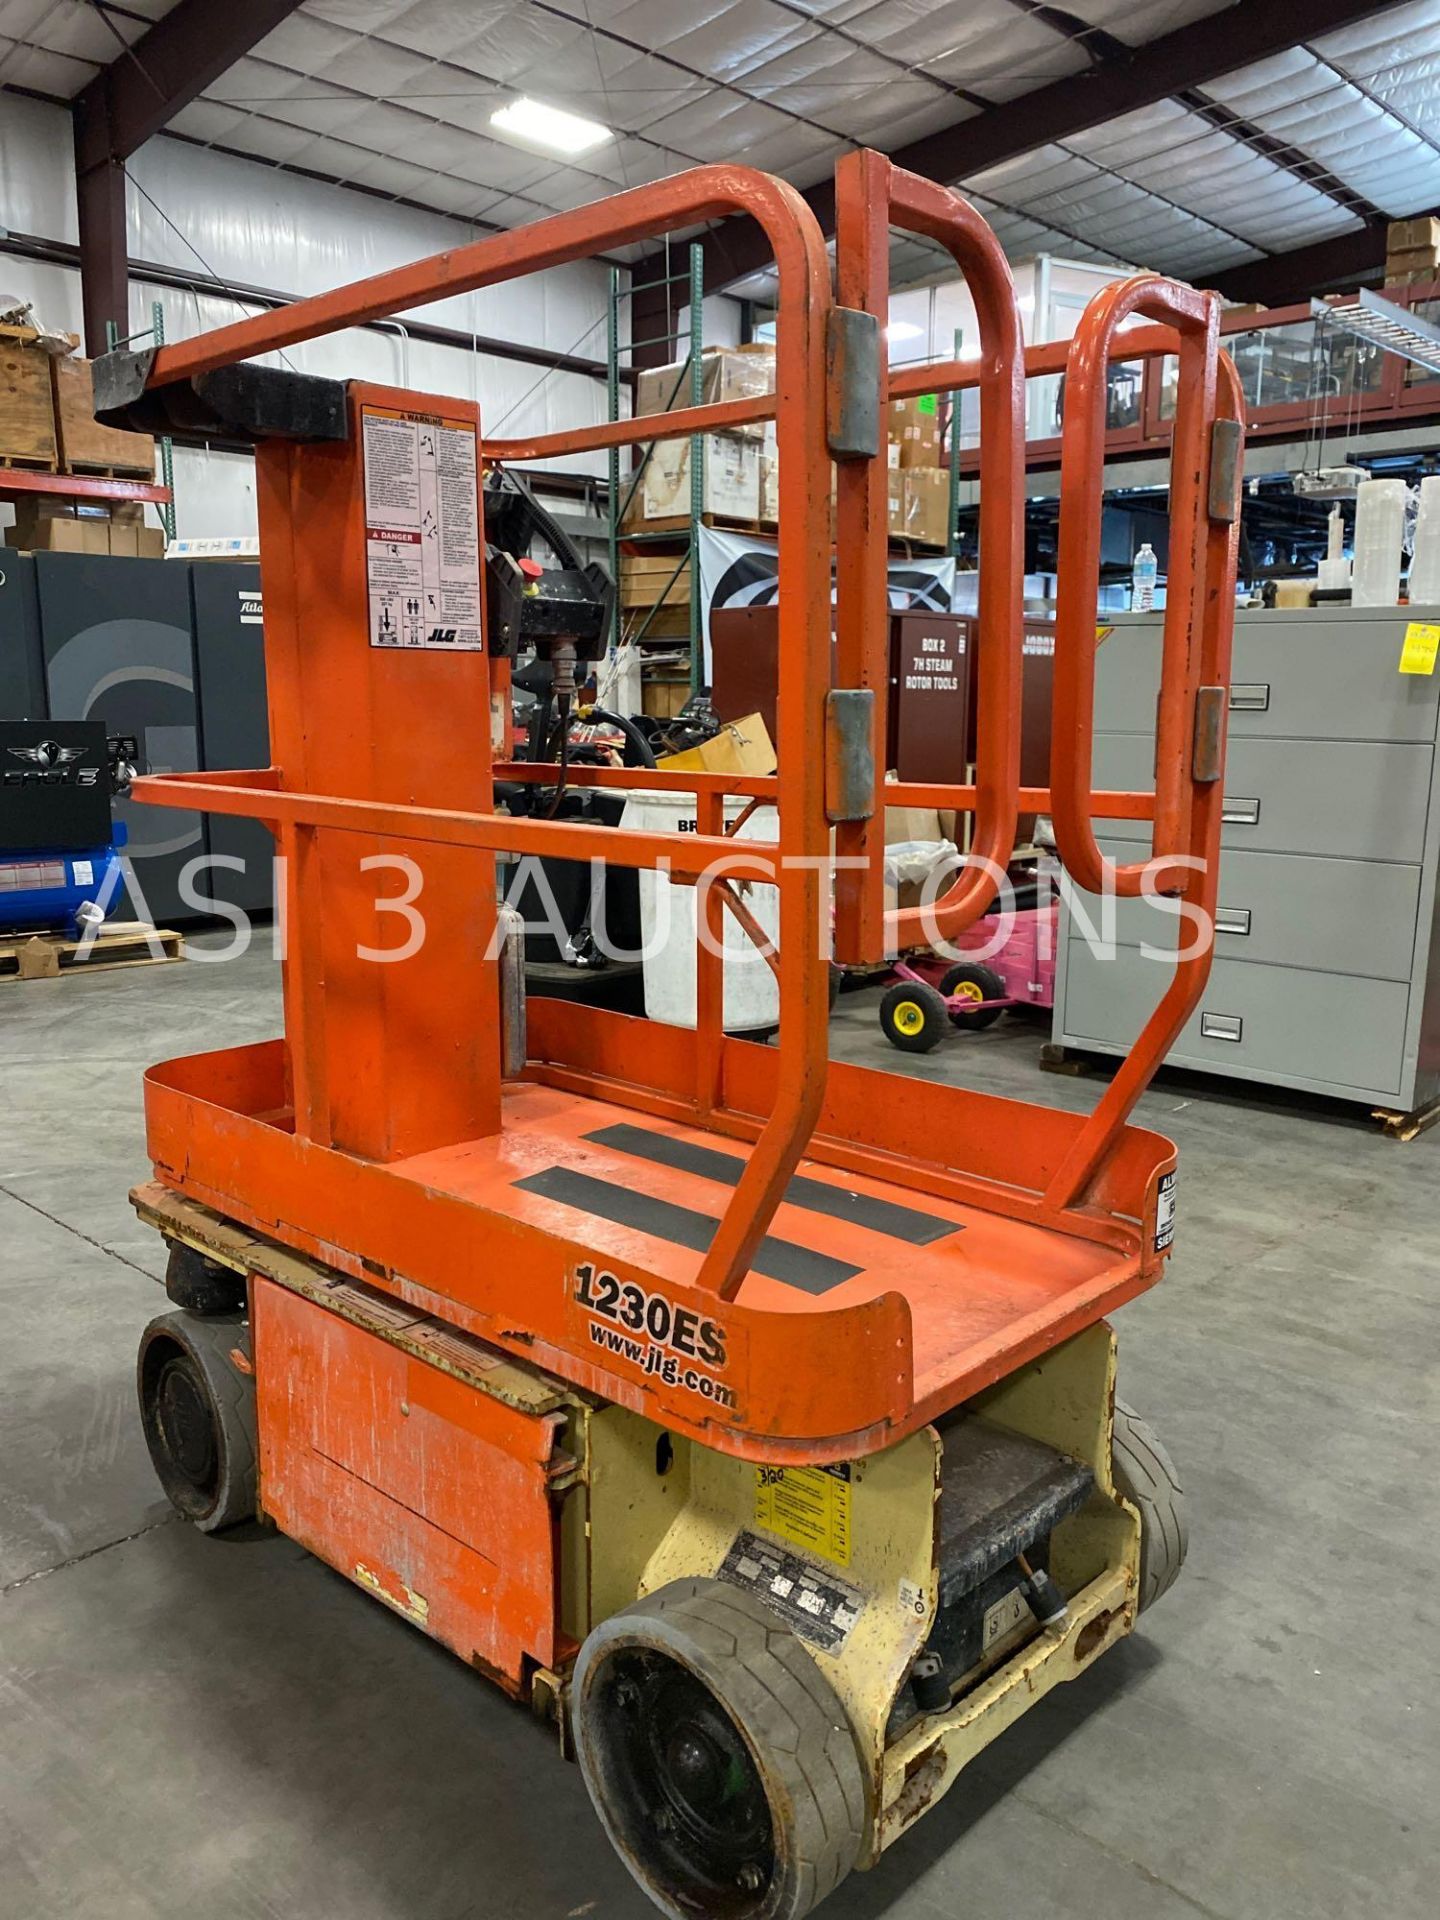 JLG ELECTRIC MAN LIFT MODEL 1230ES, 12' PLATFORM HEIGHT, SELF PROPELLED, BUILT IN BATTERY CHARGER - Image 4 of 7